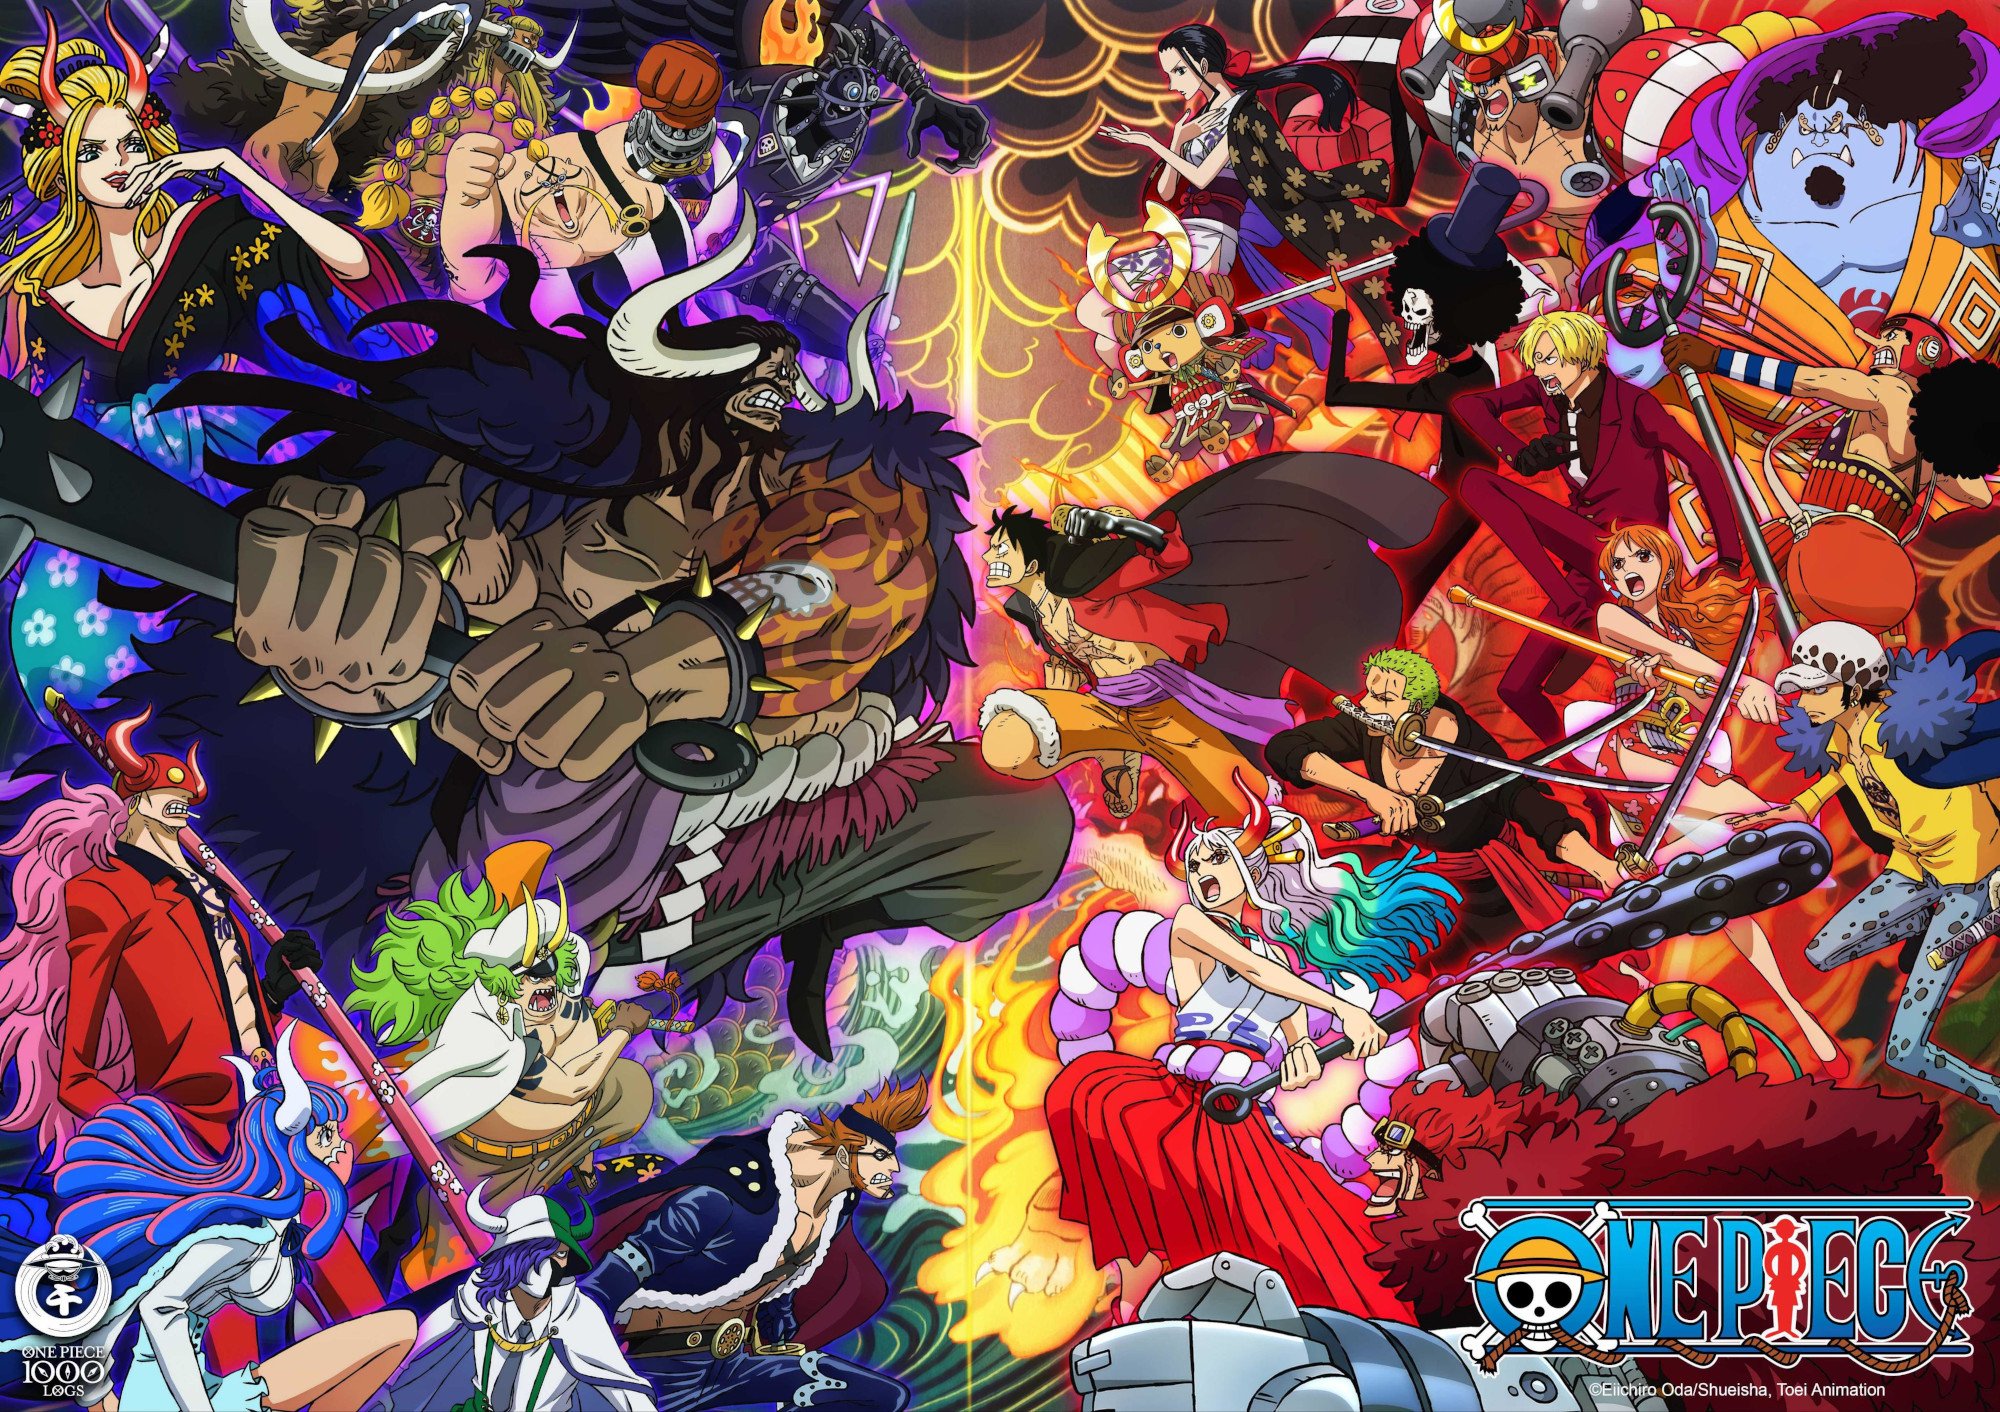 'One Piece' key art for our article about manga chapter 1055's release time. It features Luffy and the Straw Hats, who look like they're about to fight their enemy.